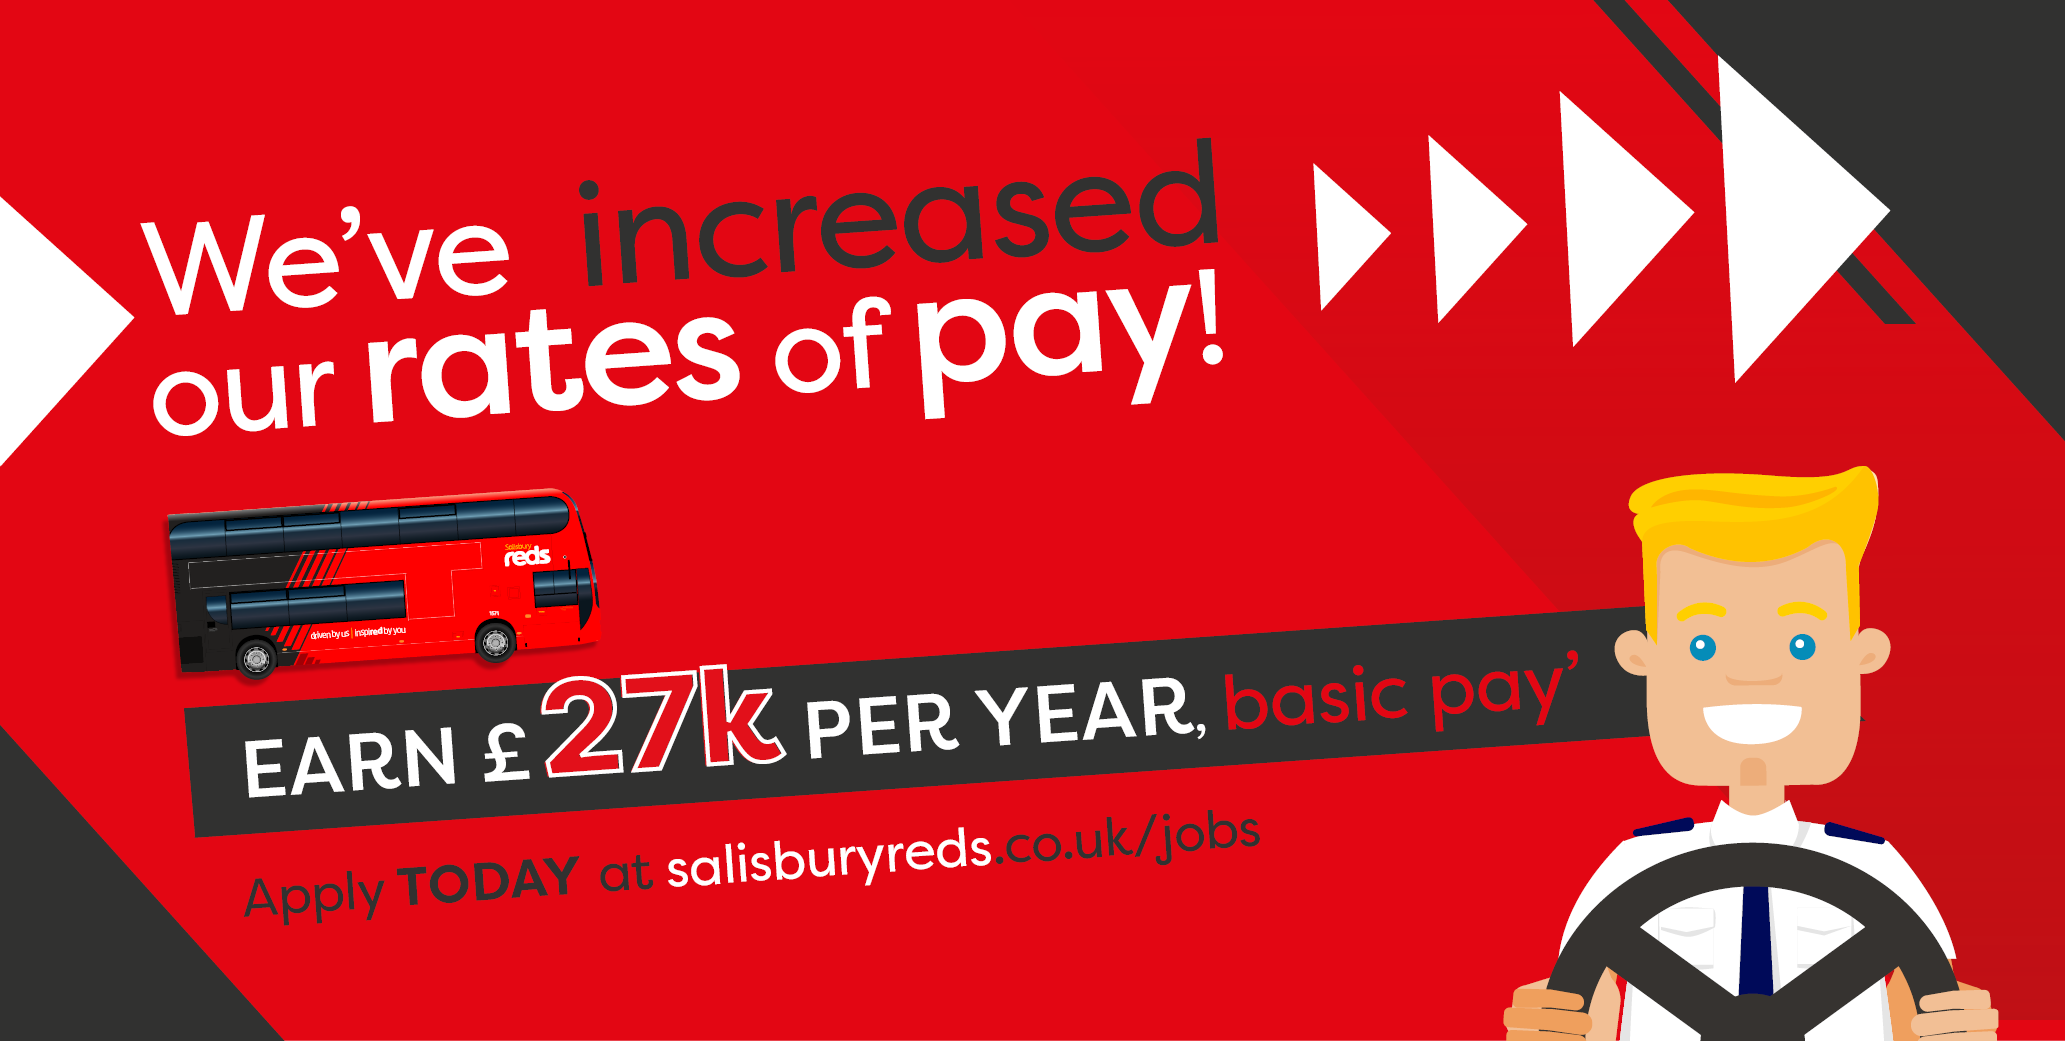 Salisbury Reds increased rates of pay